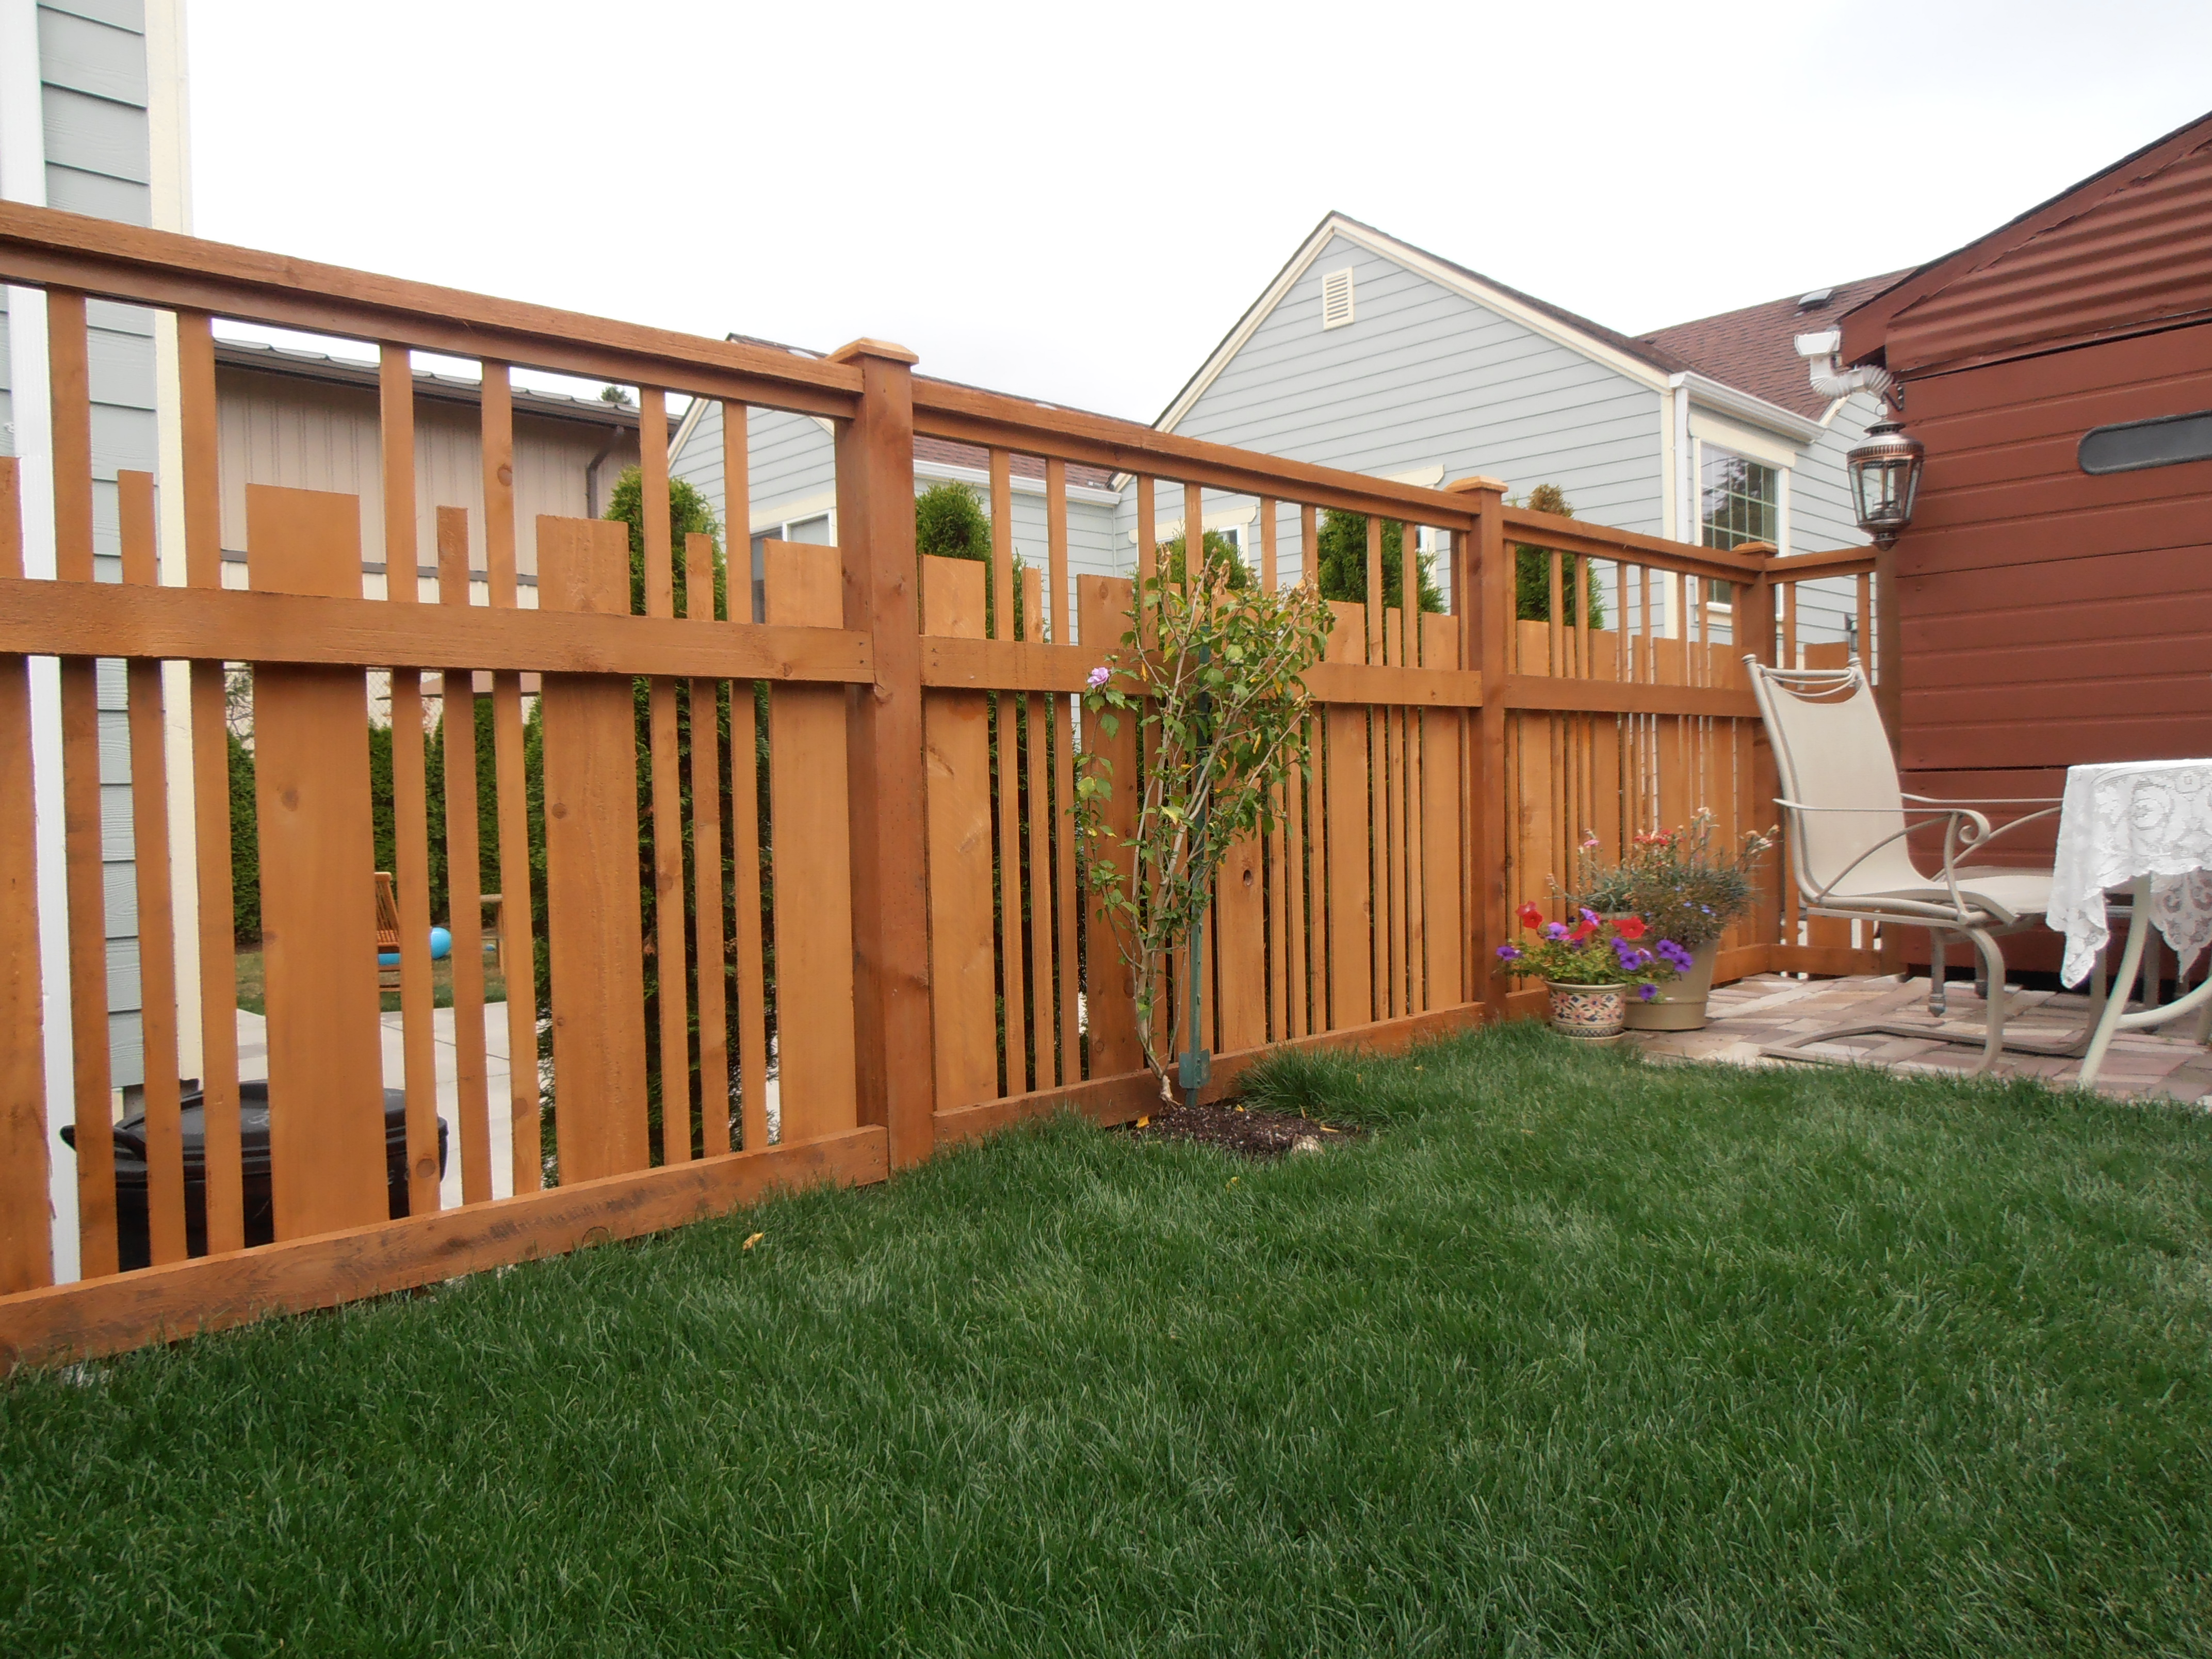 New Cedar Fences, Wood Fence Repair Seattle | Citywide Fence